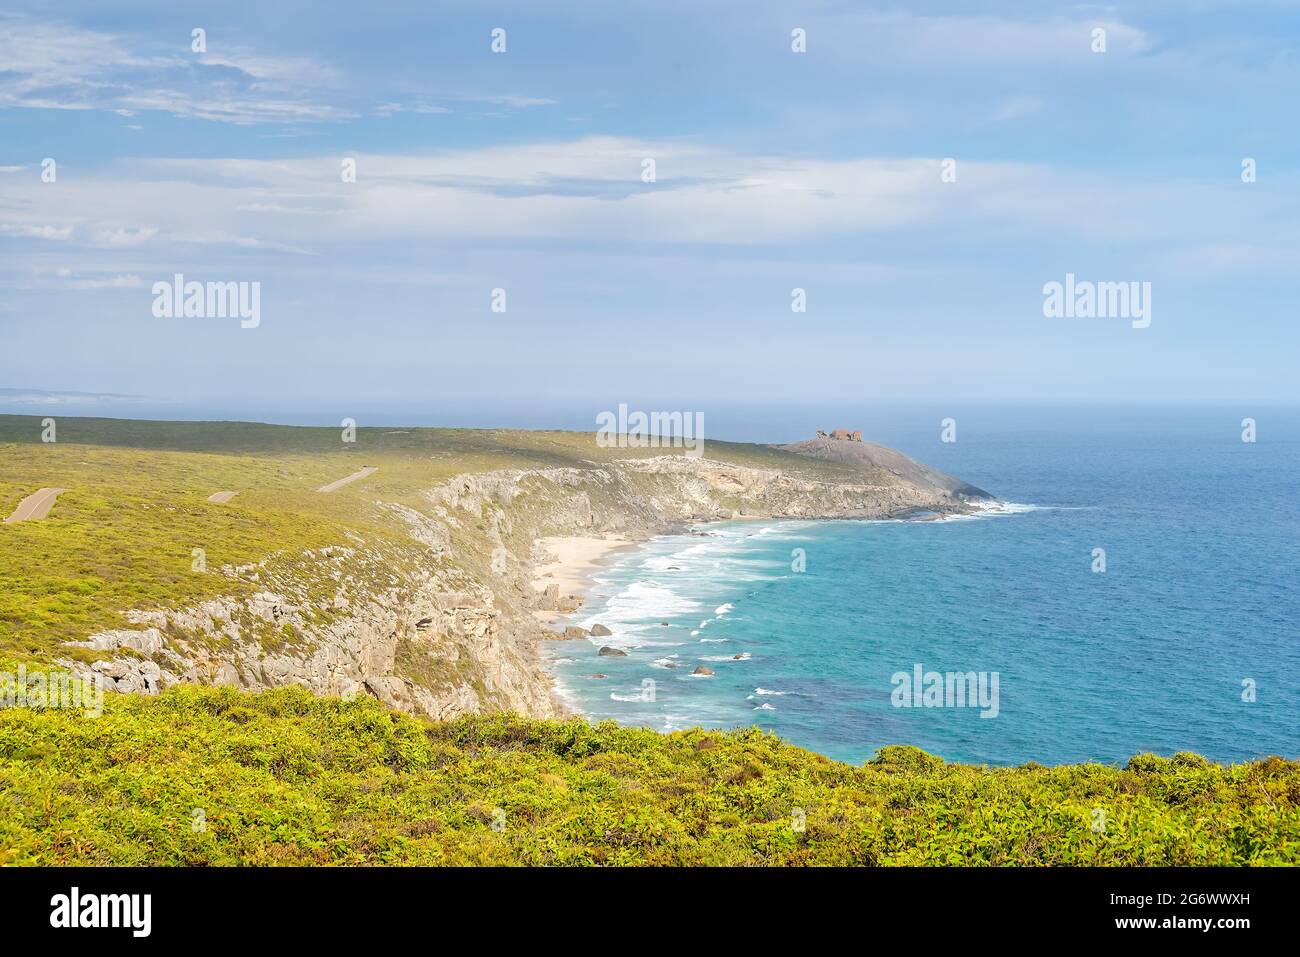 Remarkable Rocks viewed from the lookout, Kangaroo Island, South Australia Stock Photo